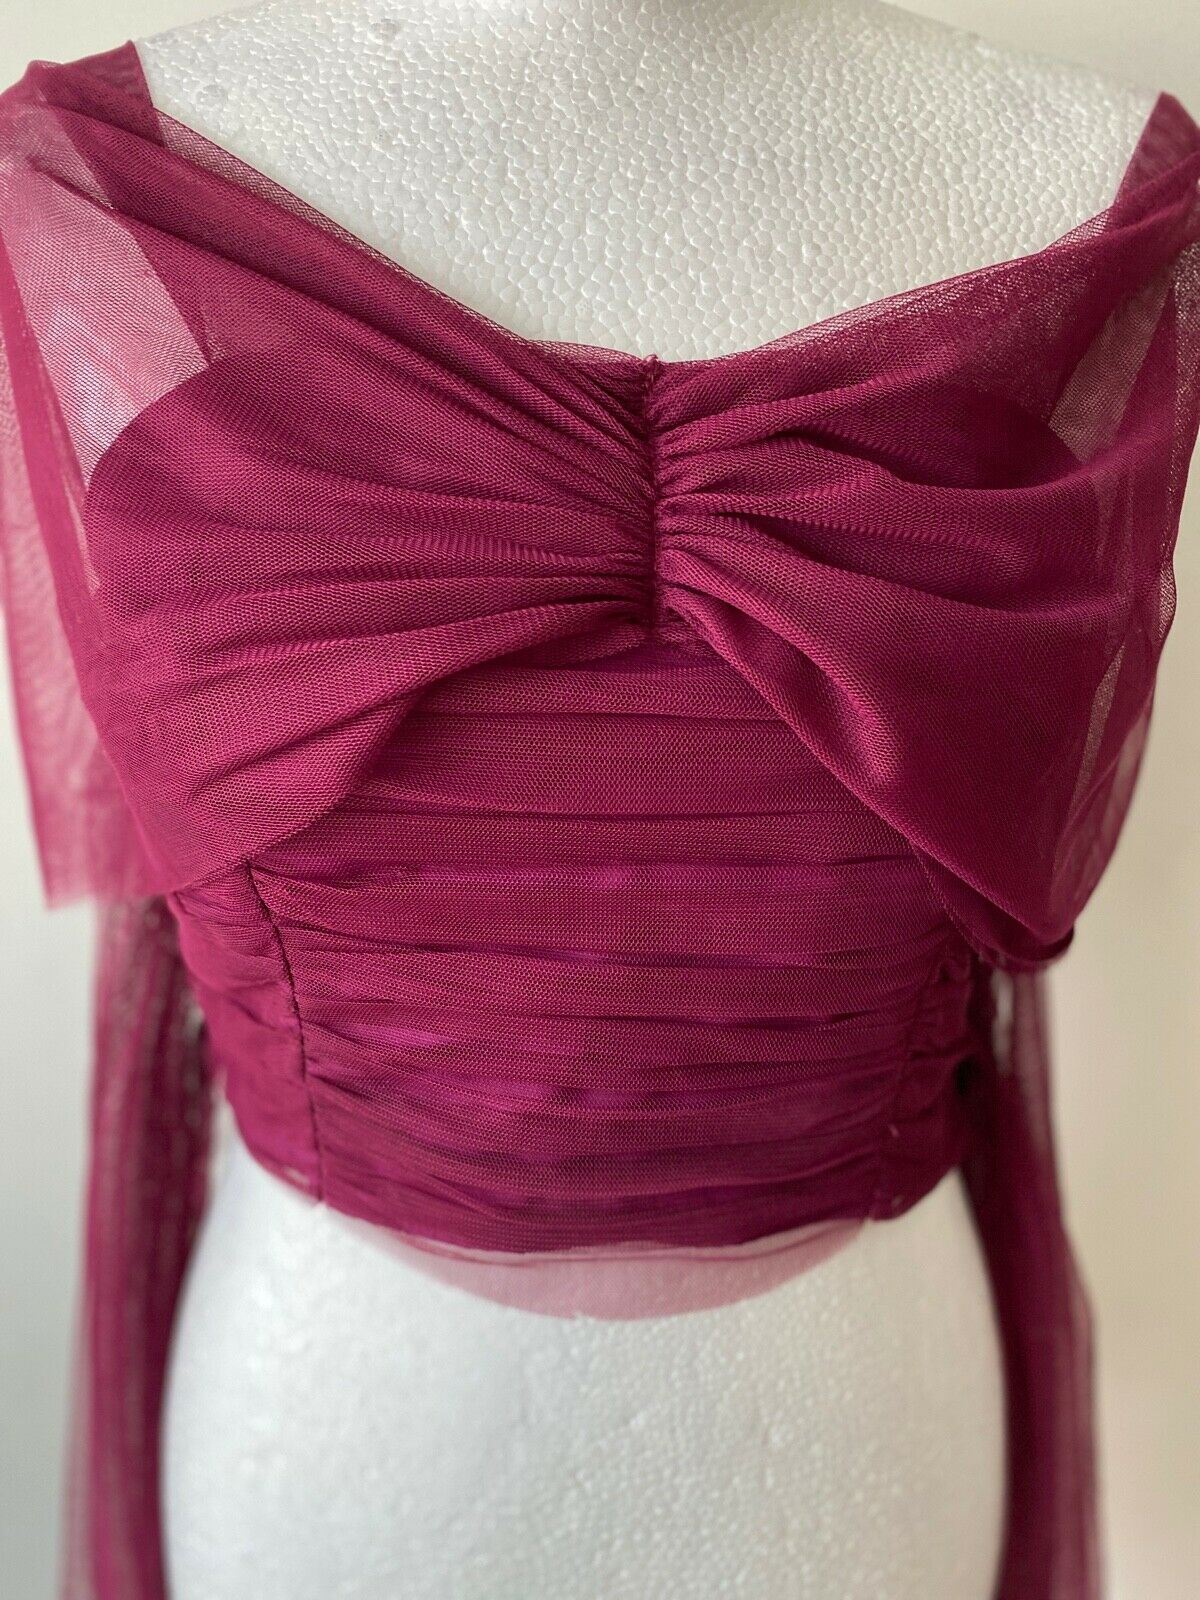 River Island Purple Strapless Crop Top Mesh Bow Detail Size 10